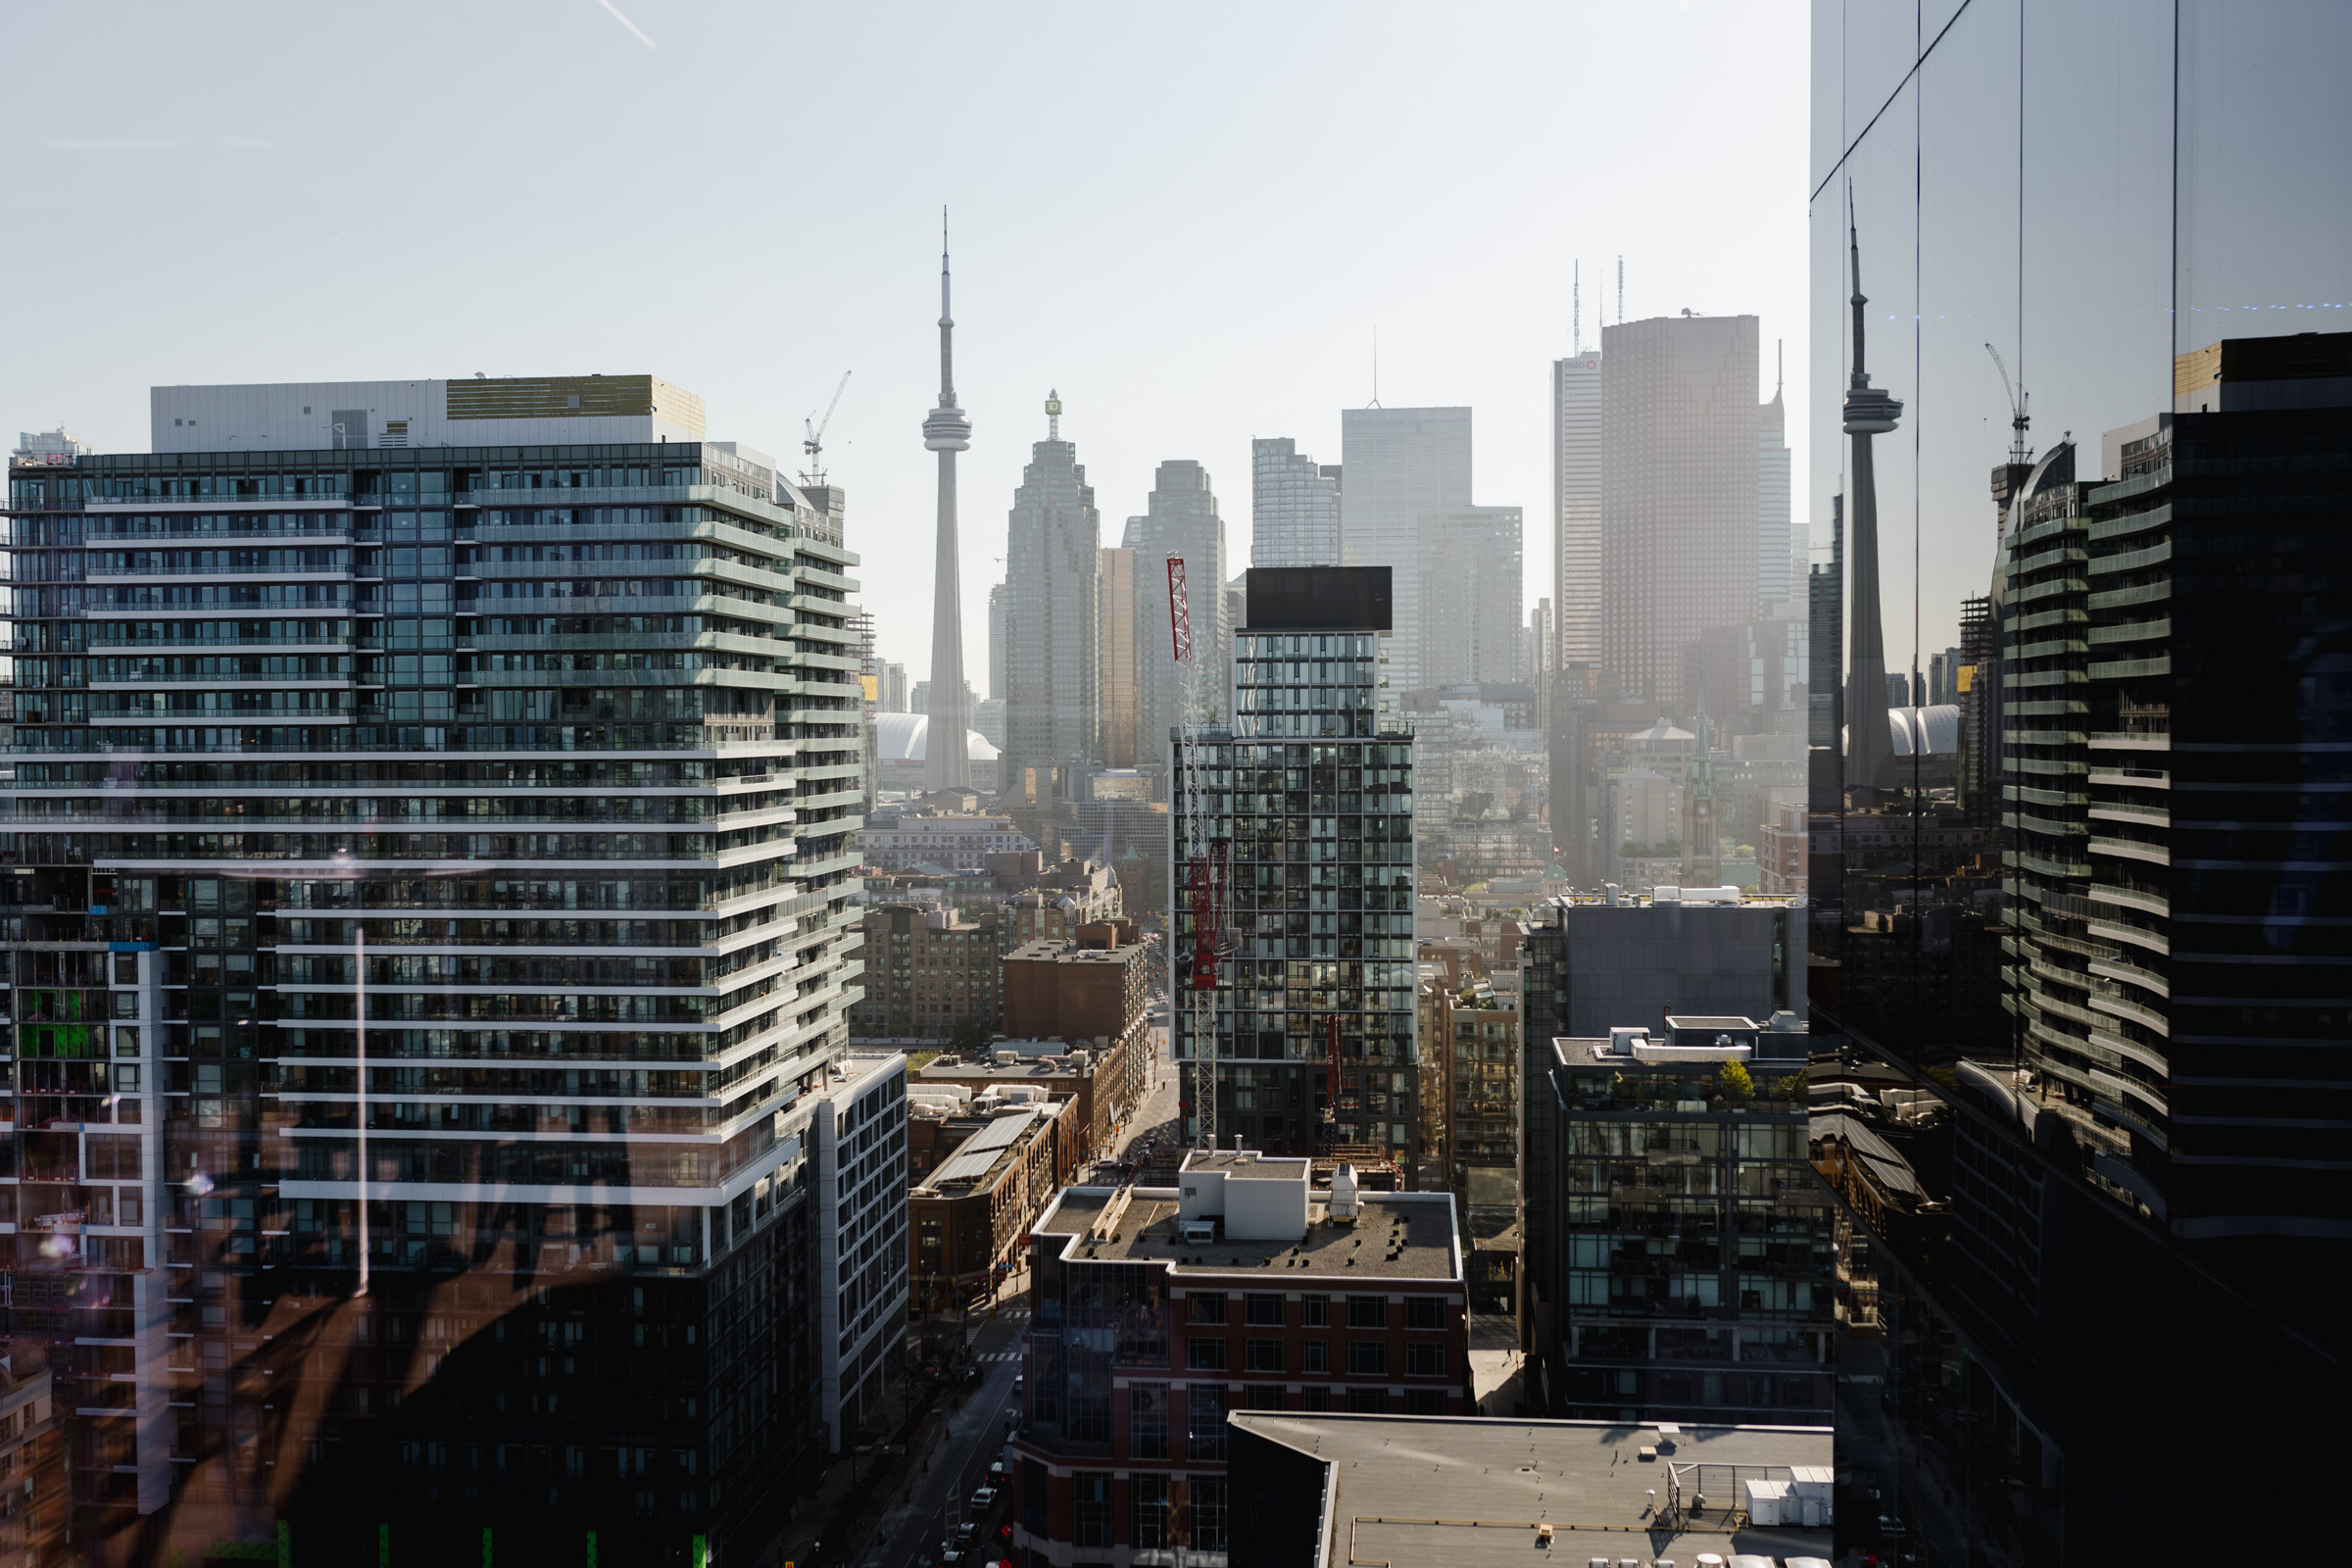 Aerial view of a cityscape featuring high-rise buildings, the CN Tower, and glass reflections on the right side, with a clear sky in the background. This stunning scene captures the essence of corporate photography at its finest.